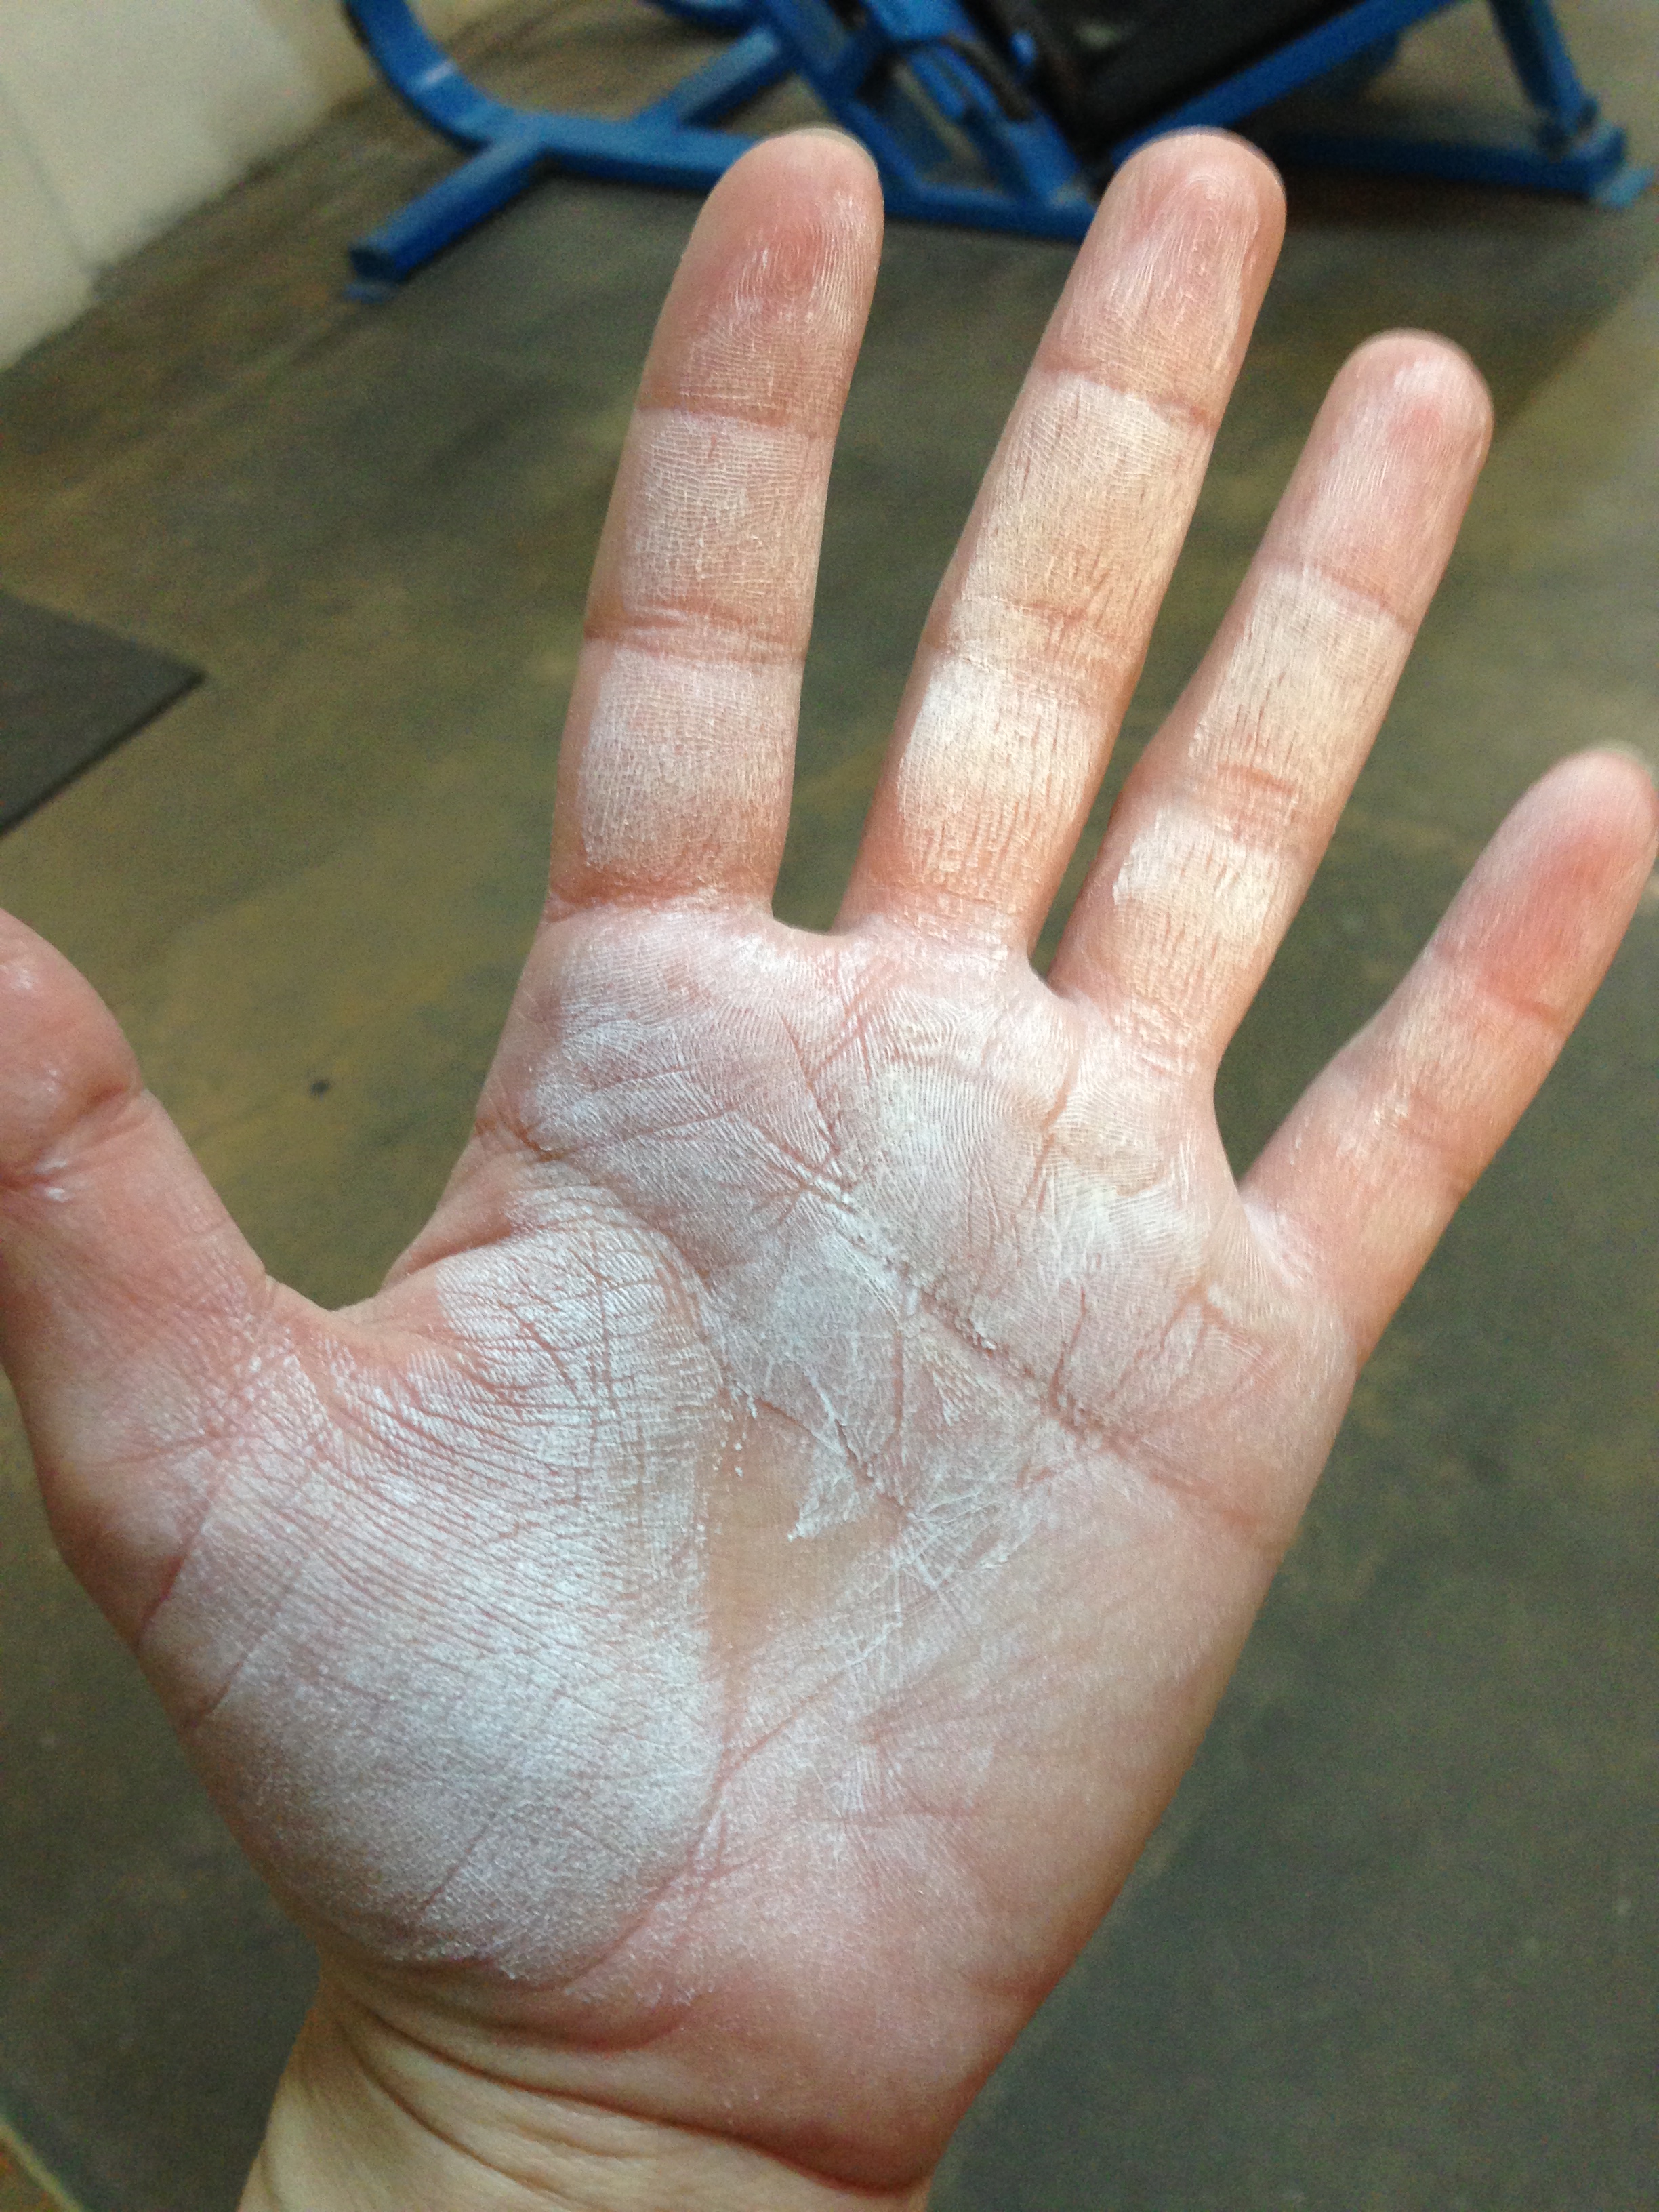 I love my callouses.&nbsp; At least the unchalked area makes a little heart in the middle of my palm.&nbsp; That's feminine, right?